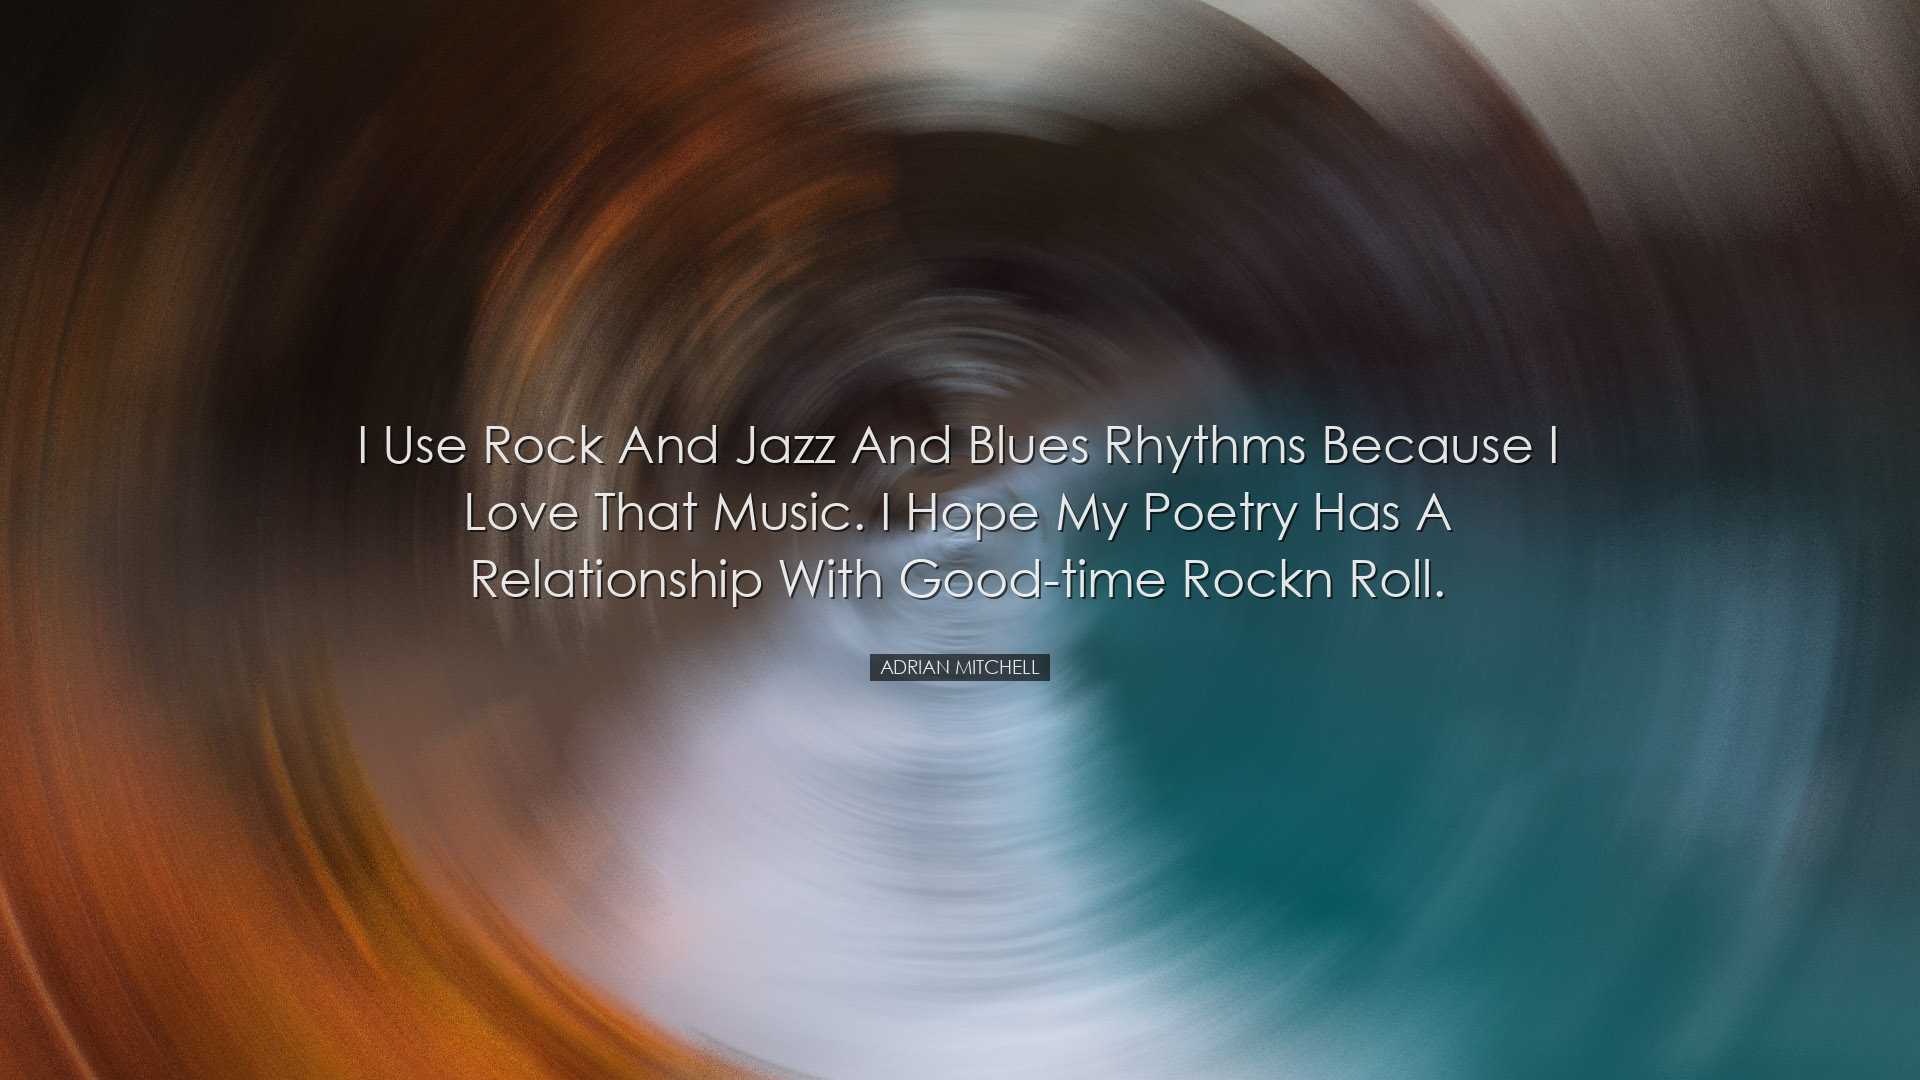 I use rock and jazz and blues rhythms because I love that music. I